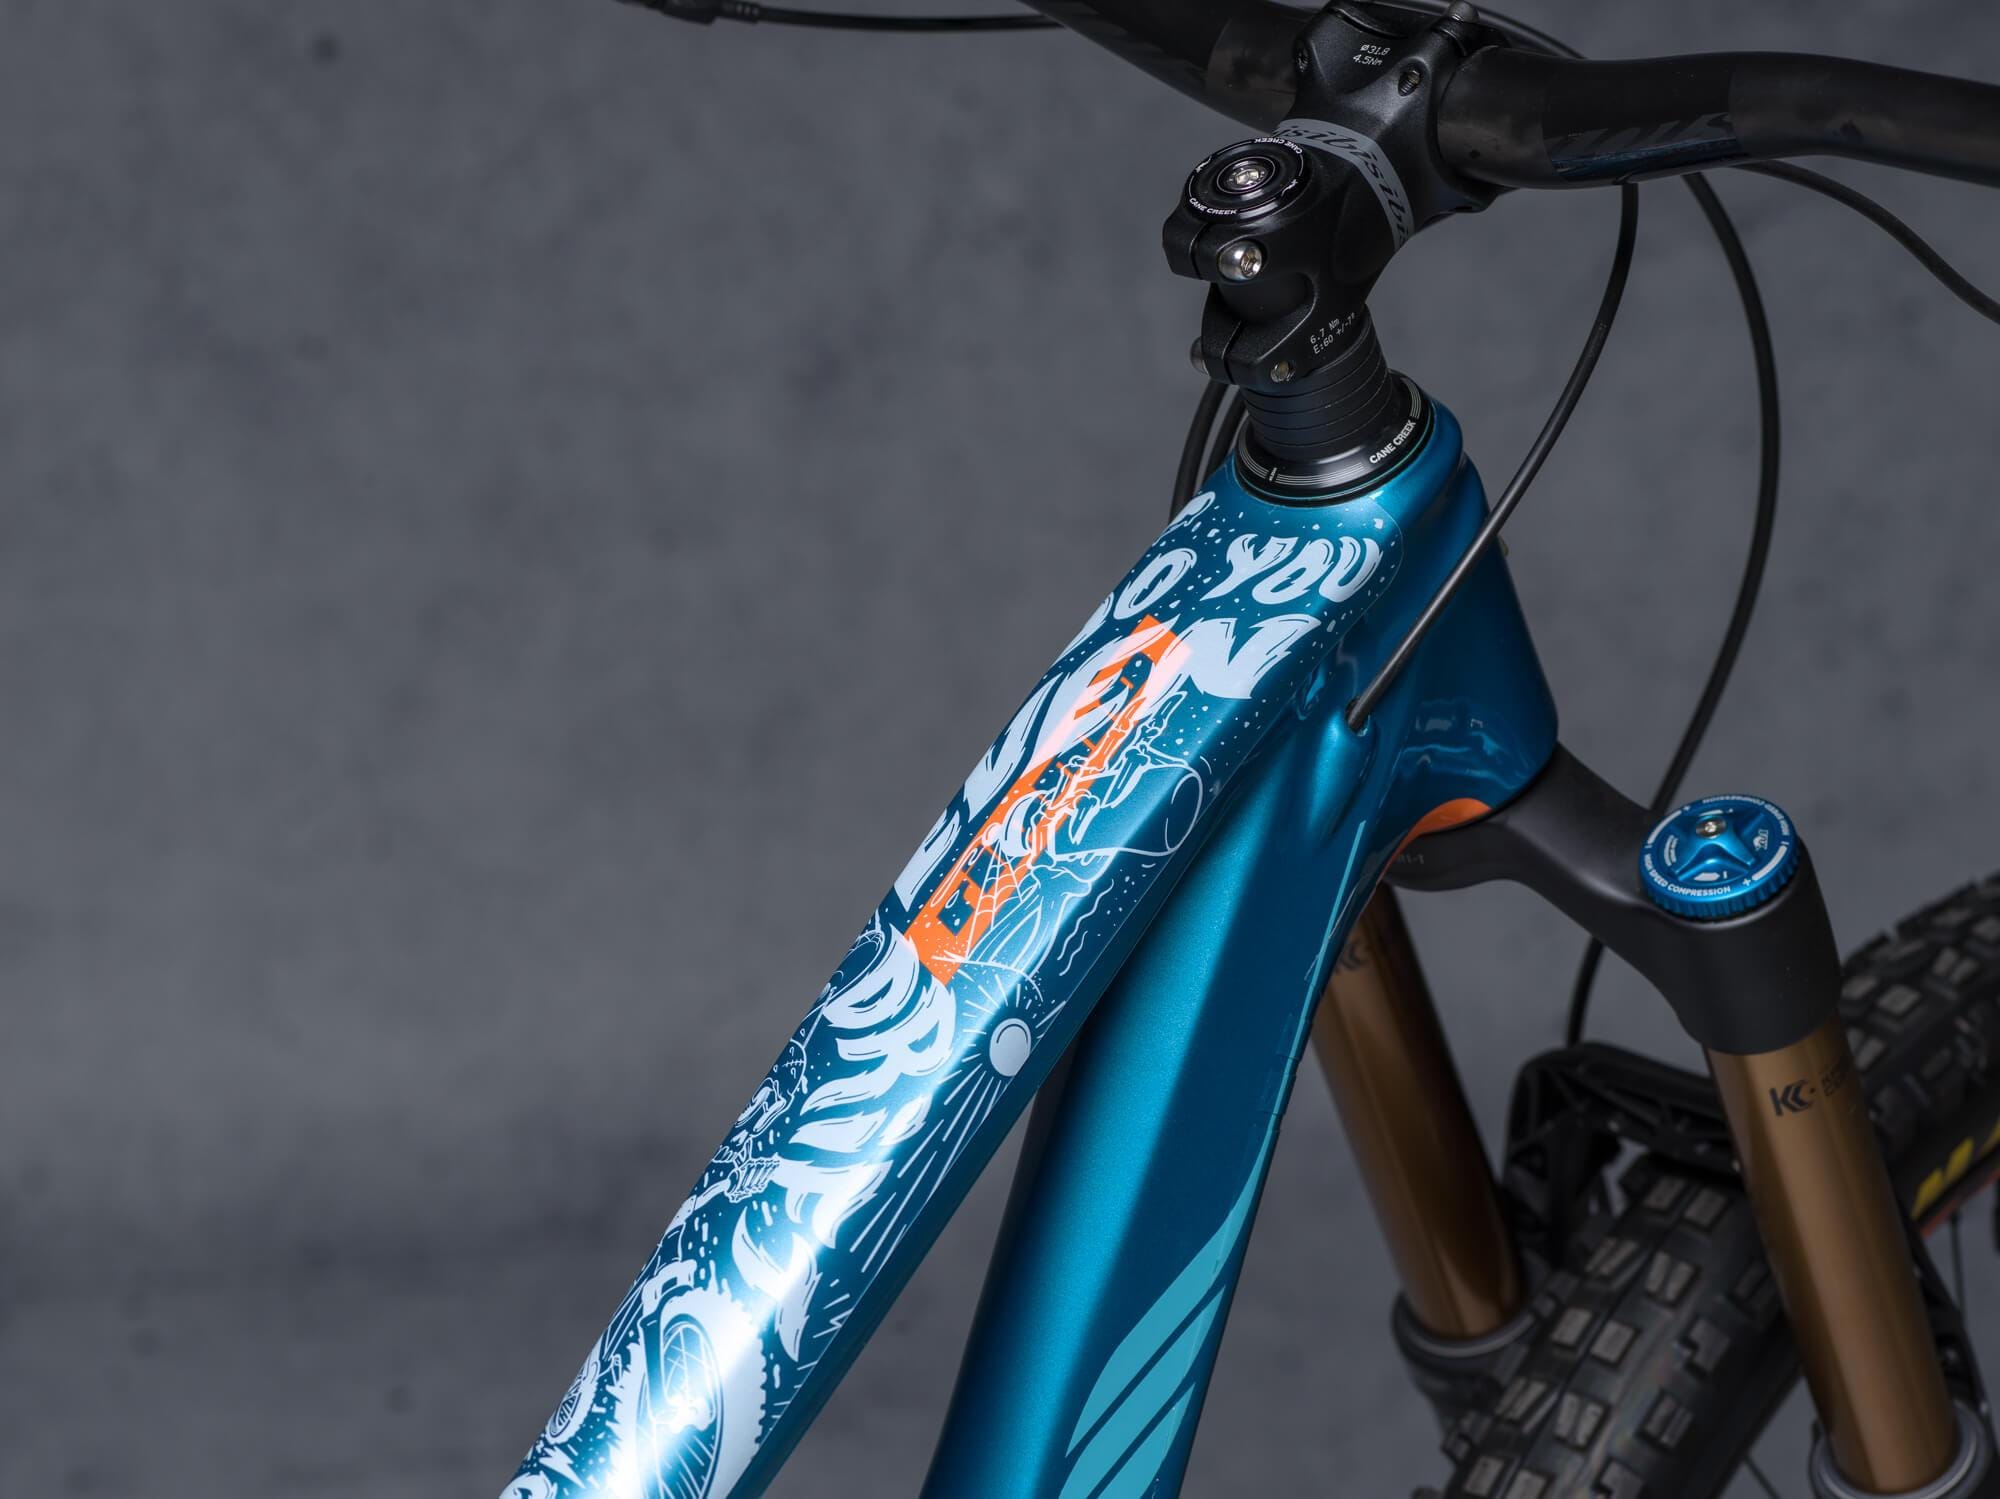 ALL MOUNTAIN STYLE AMS BASIC FRAME PROTECTION WRAP CLEAR / WOLF